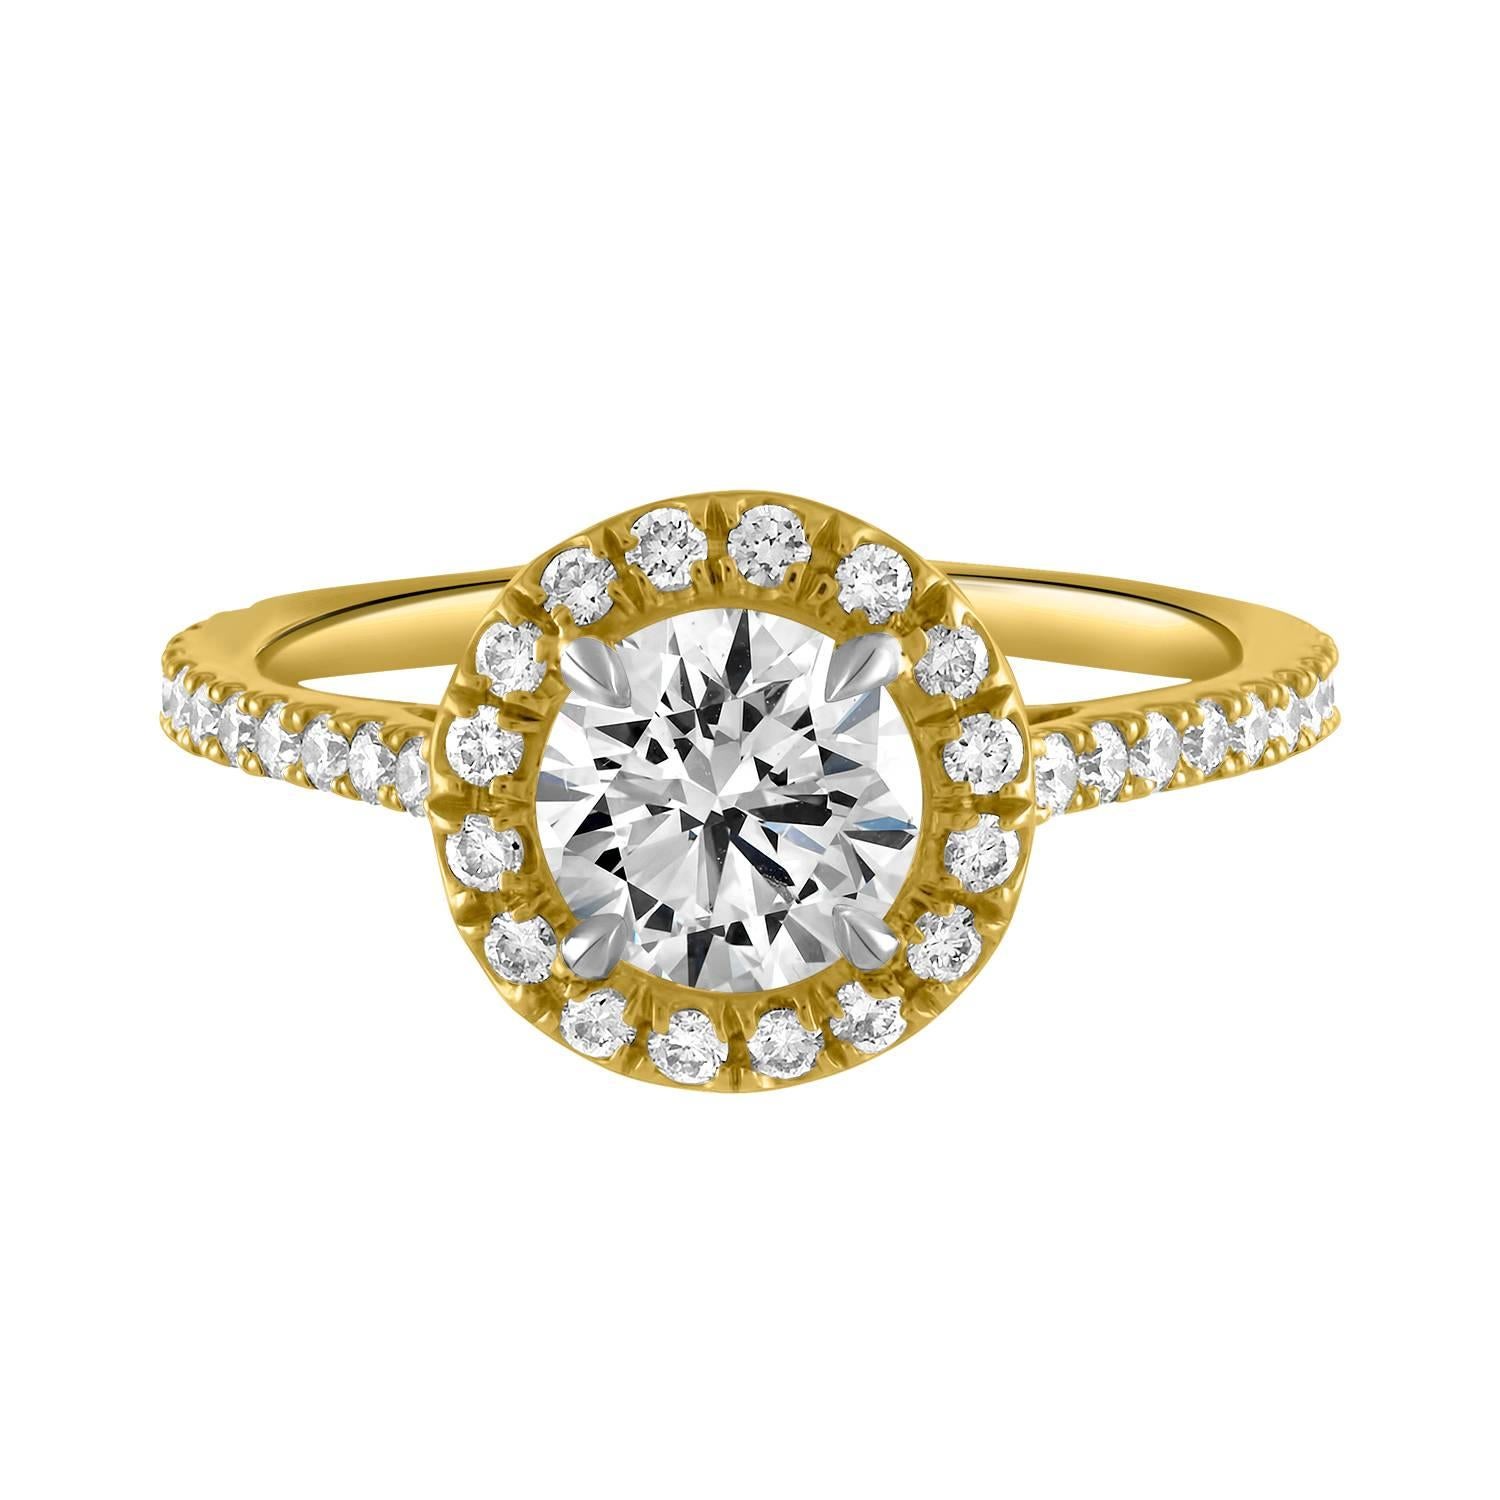 Handmade 18k Yellow Gold & 0.90ct GIA Certified Diamond Surround Engagement Ring For Sale